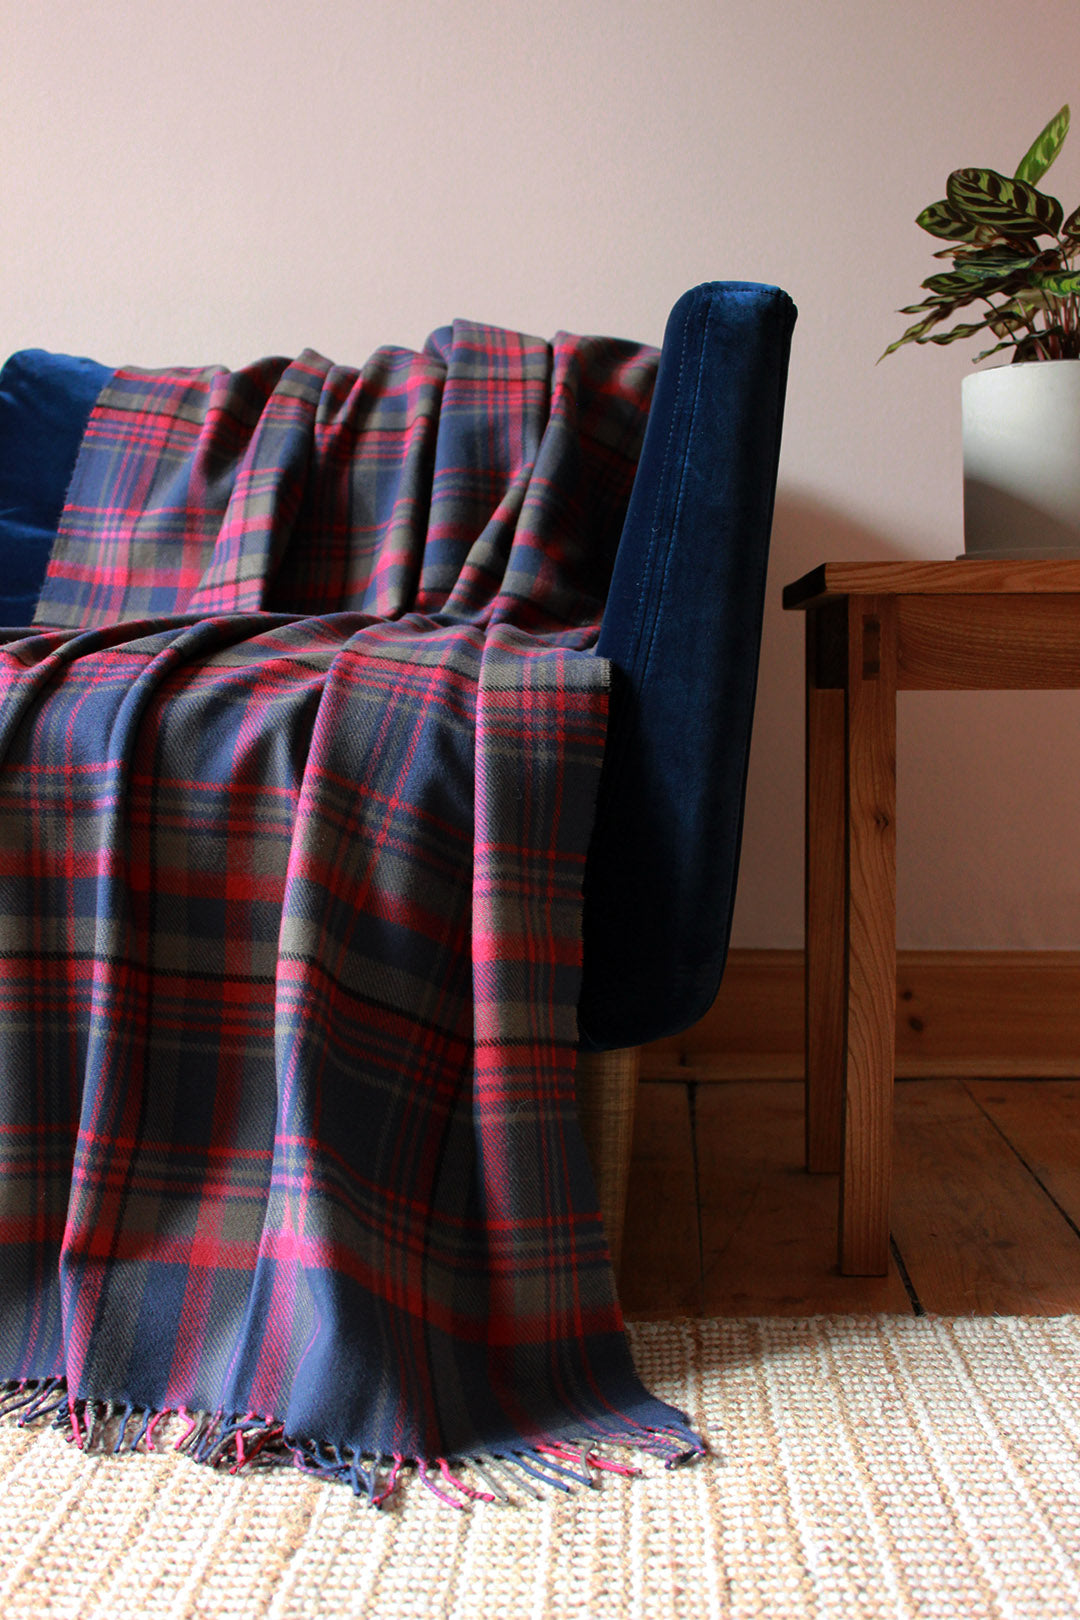 Limited edition Highlands at dusk lambswool blanket features an original plaid design by Araminta Campbell